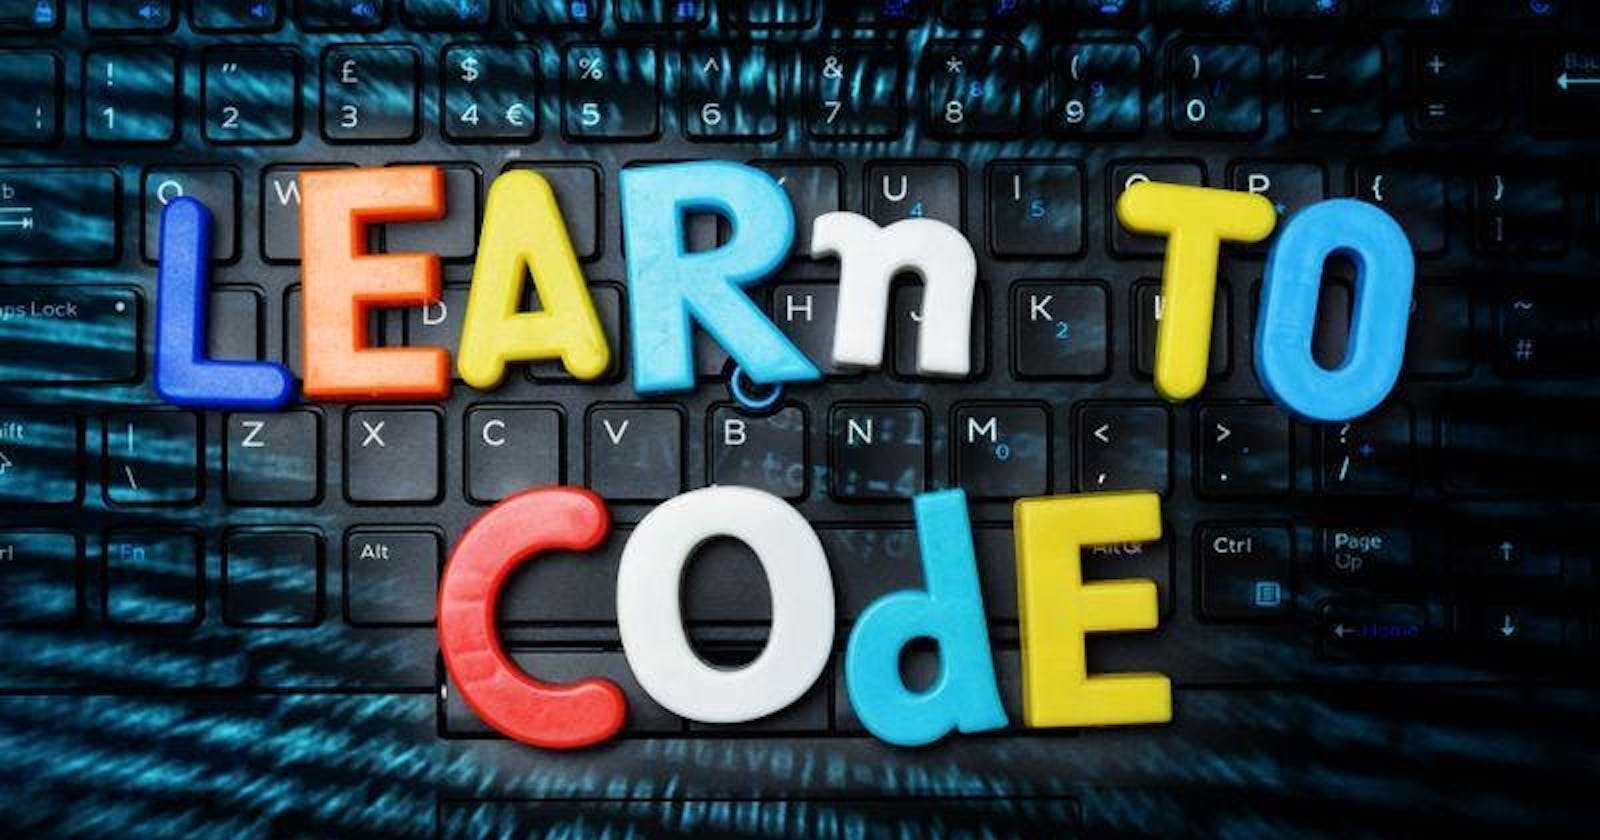 So You Want To Learn To Code...